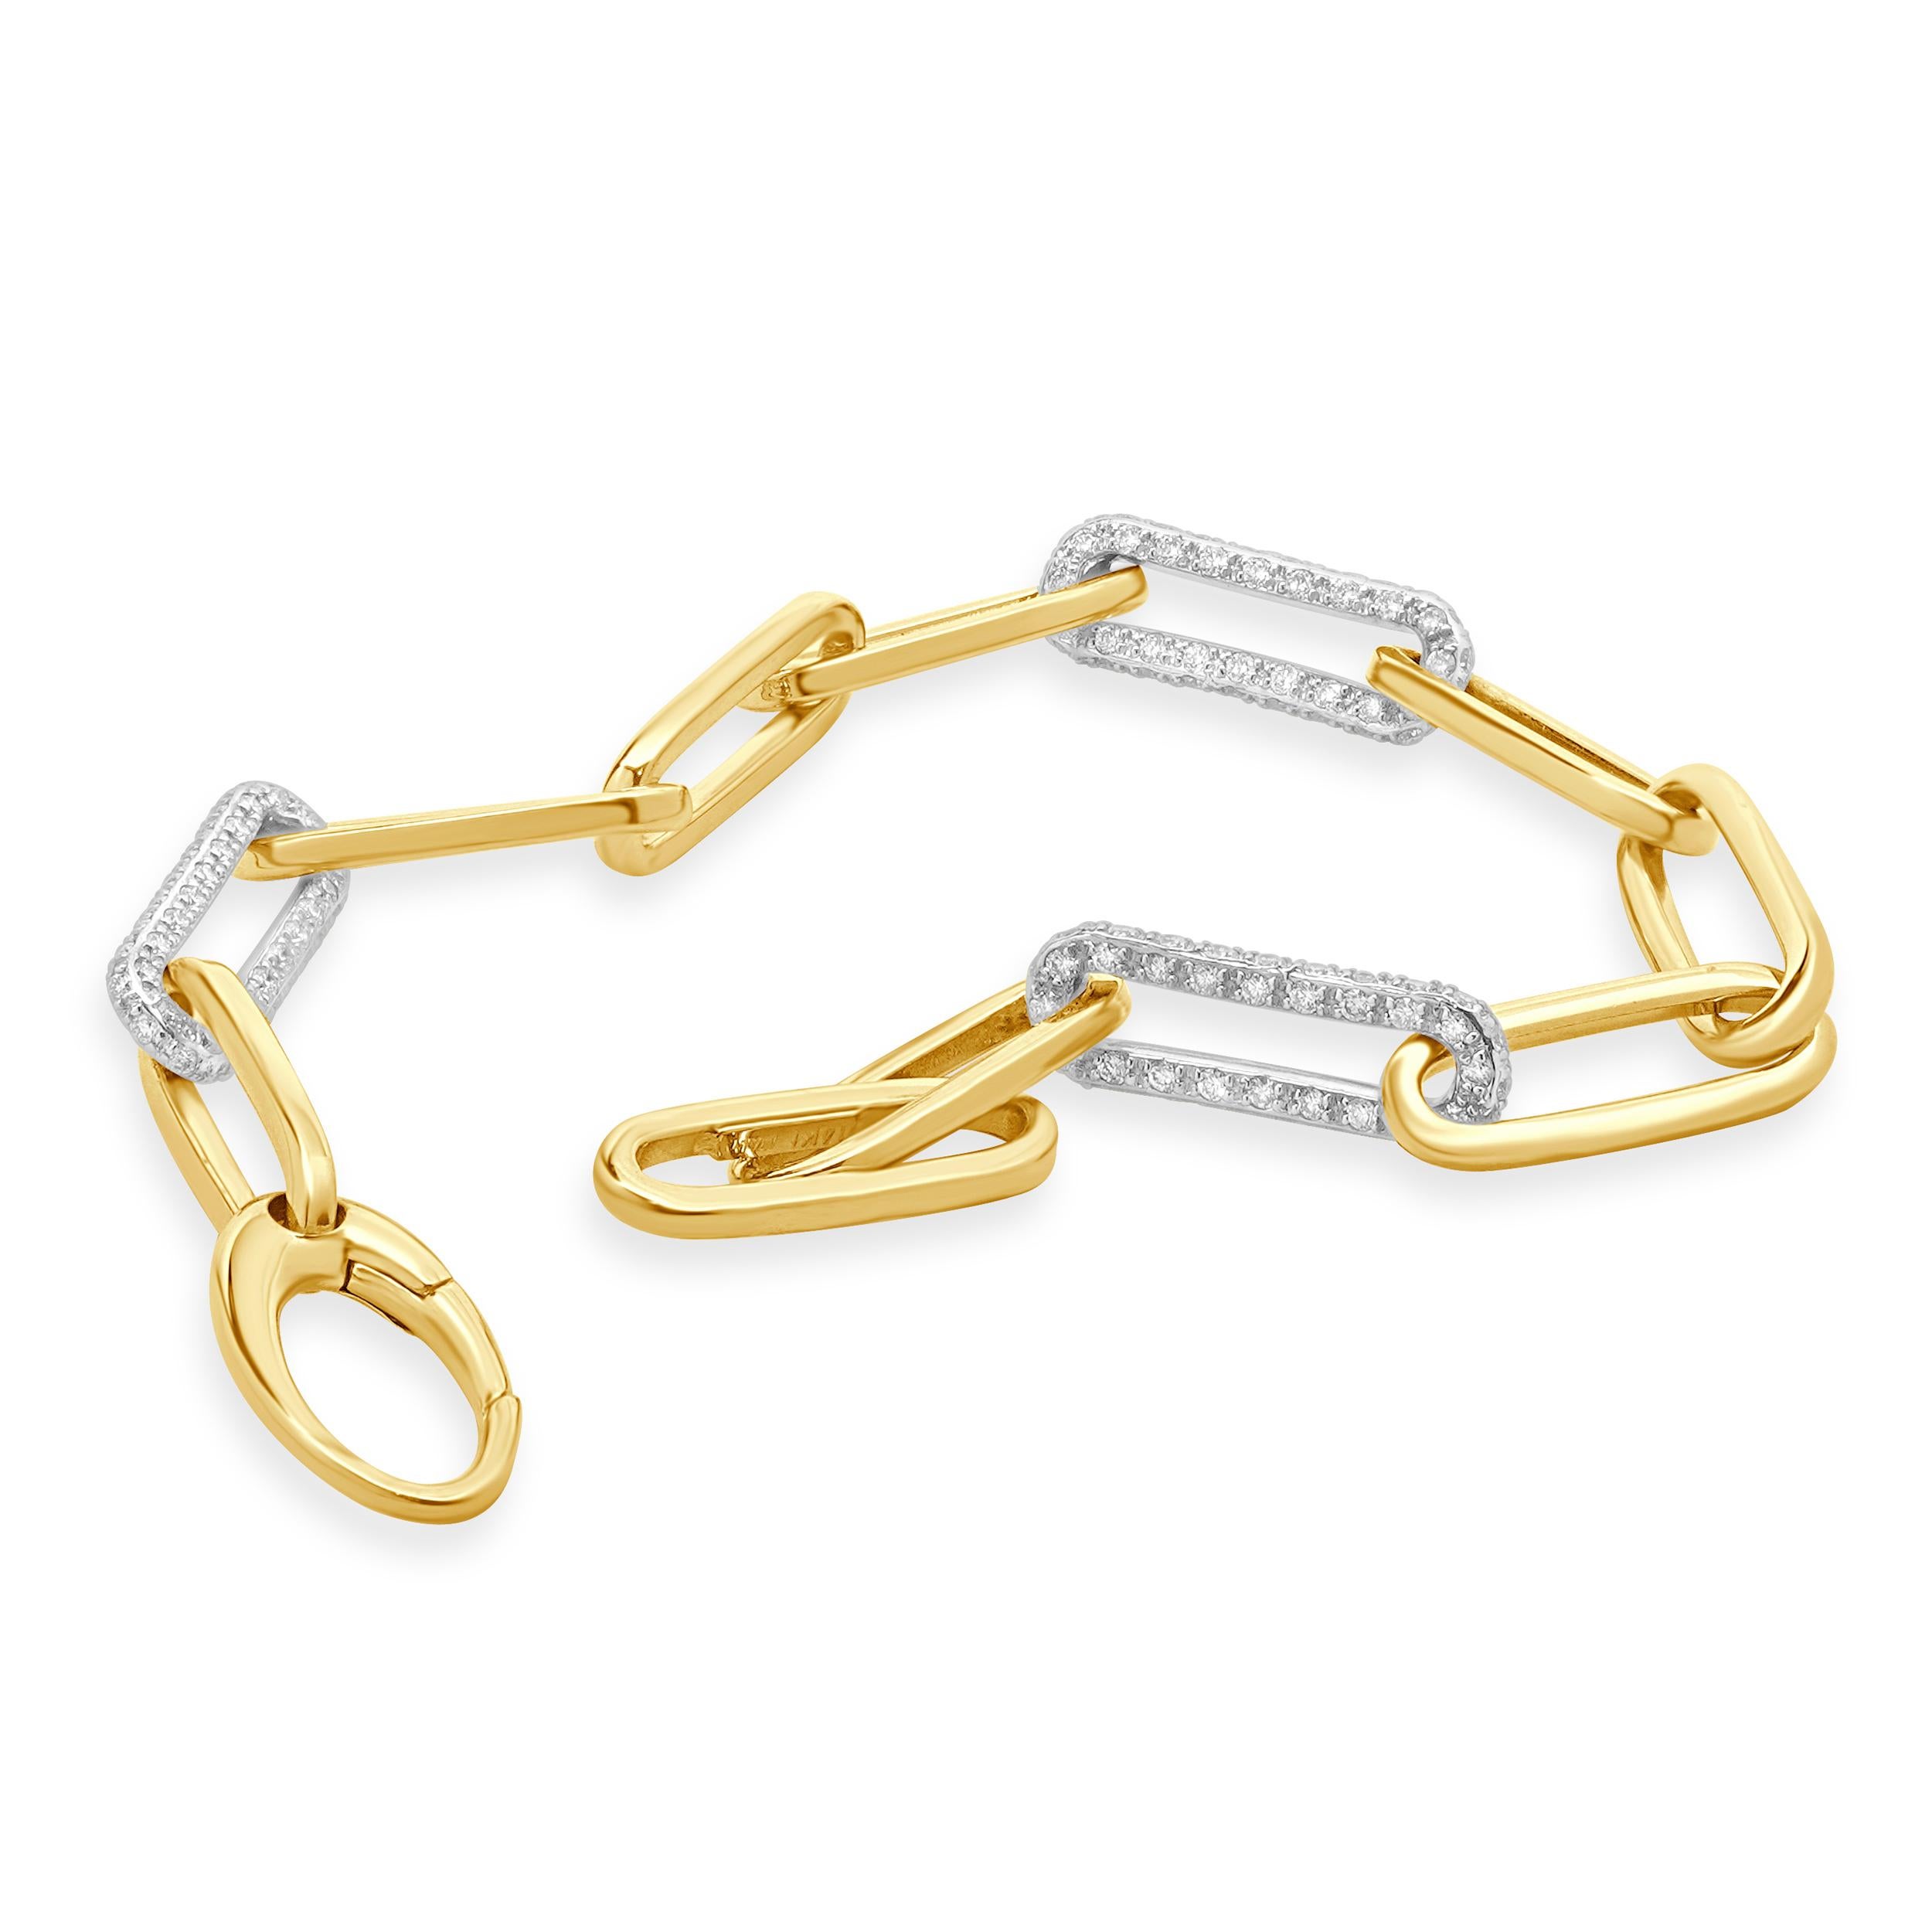 14 Karat White and Yellow Gold Alternating Diamond Paperclip Link Bracelet In Excellent Condition For Sale In Scottsdale, AZ